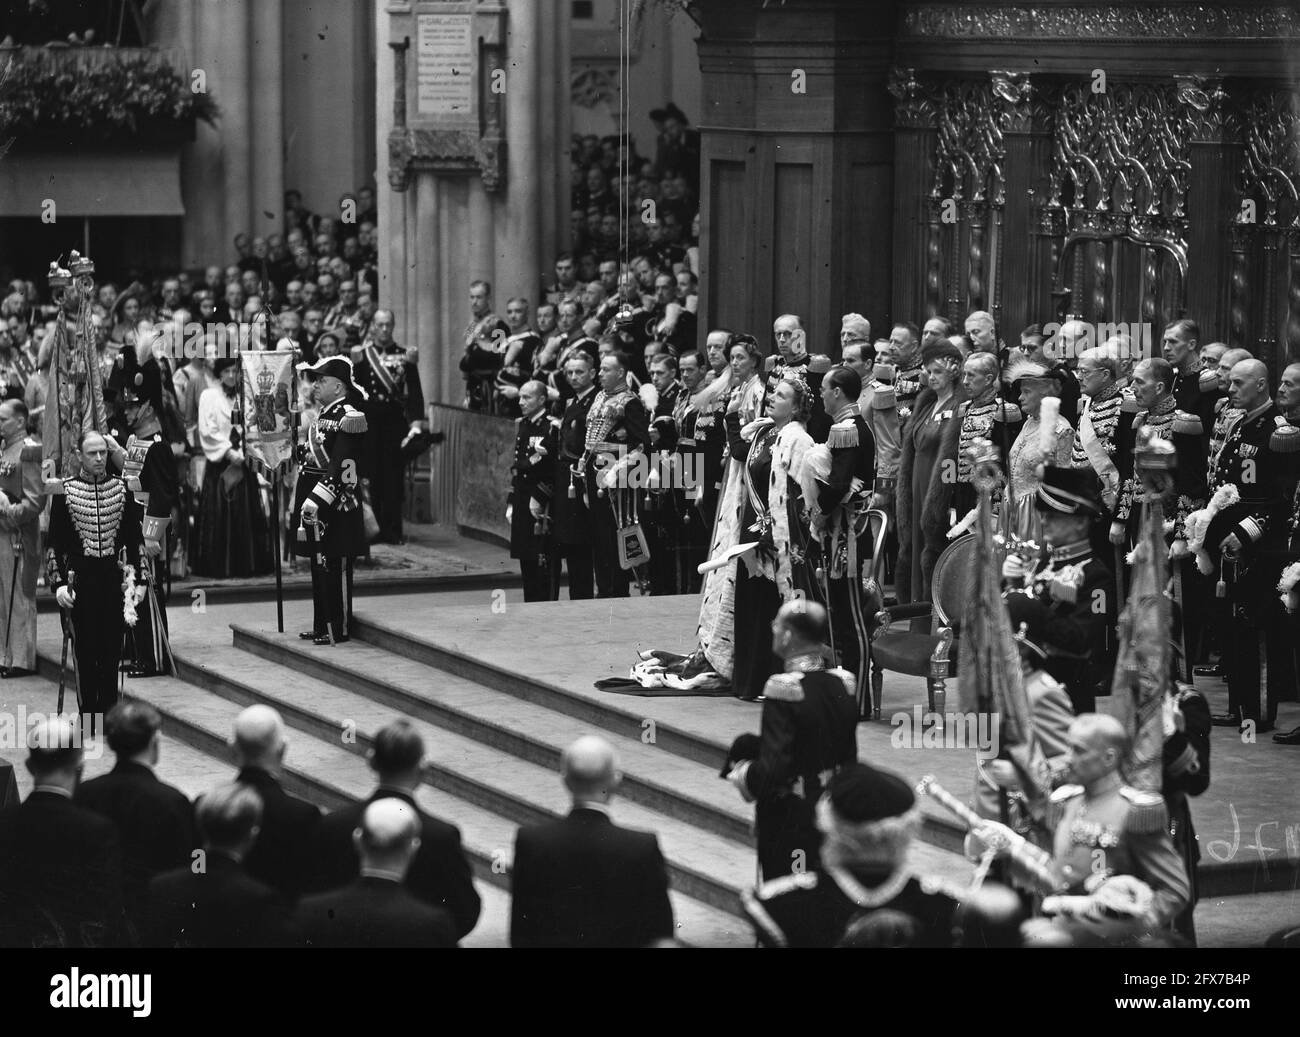 Inauguration of Queen Juliana. Ceremony in the Nieuwe Kerk in Amsterdam (volgnr.8-17). Inauguration by Queen Juliana, as prescribed in Article 53 of the Dutch Constitution, ending with the words: So truly help me God almighty!, 6 September 1948, inaugurations, Royal Family, The Netherlands, 20th century press agency photo, news to remember, documentary, historic photography 1945-1990, visual stories, human history of the Twentieth Century, capturing moments in time Stock Photo